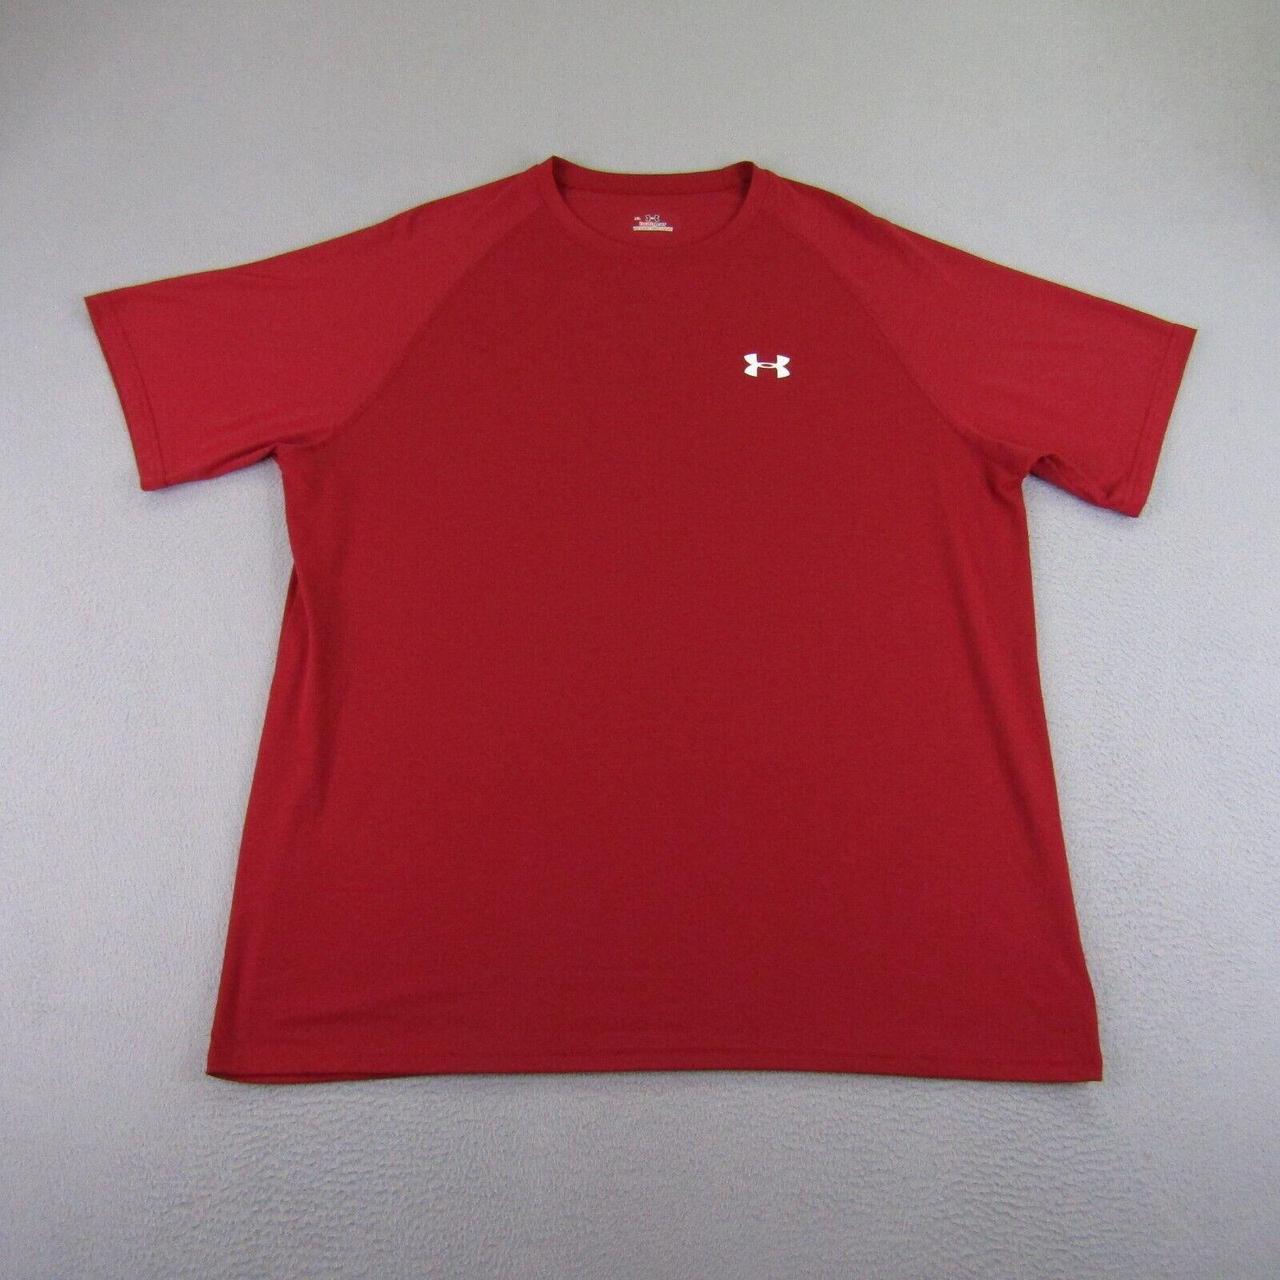 Under Armour Men's Red T-shirt